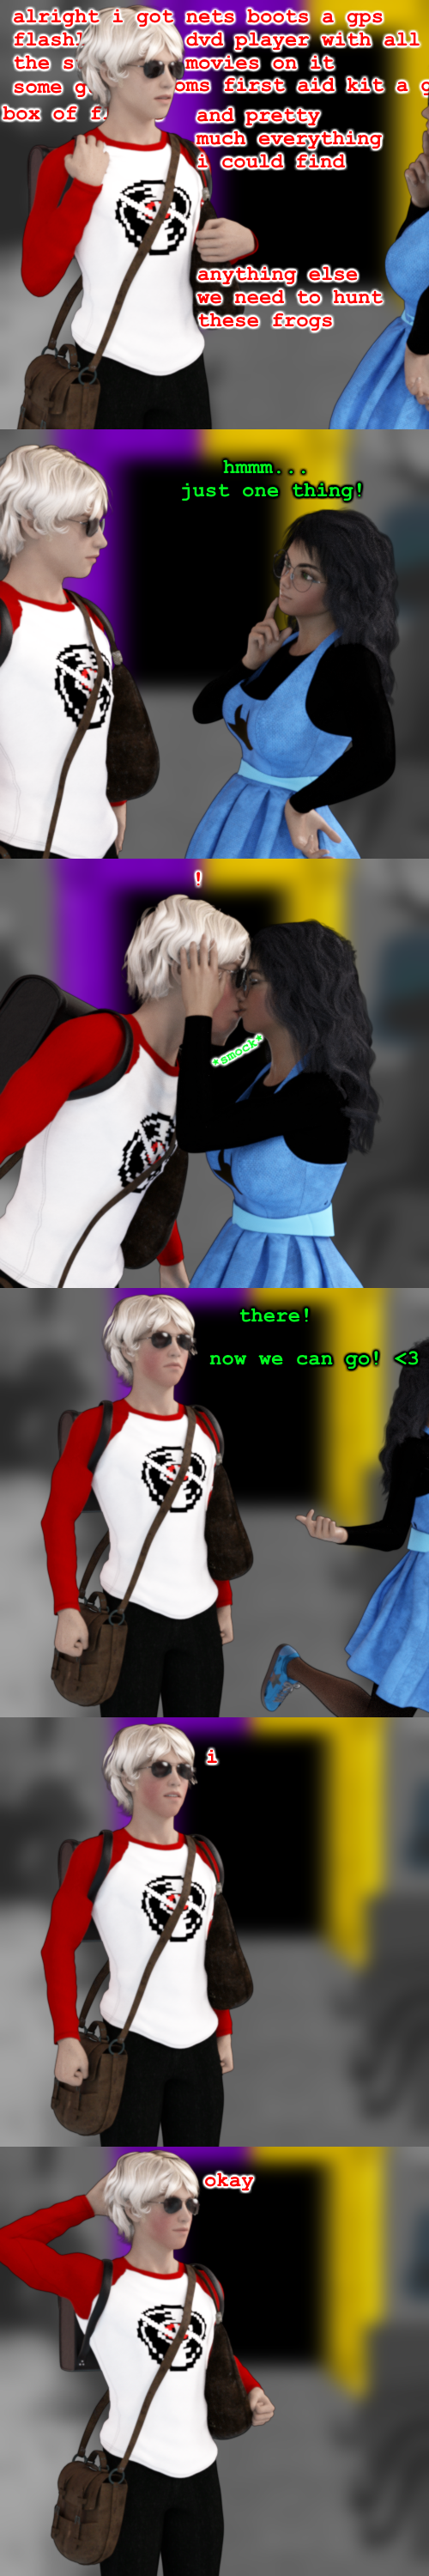 3d breedingduties comic dave_strider dress_of_eclectica heart jade_harley kiss red_baseball_tee redrom shipping spacetime